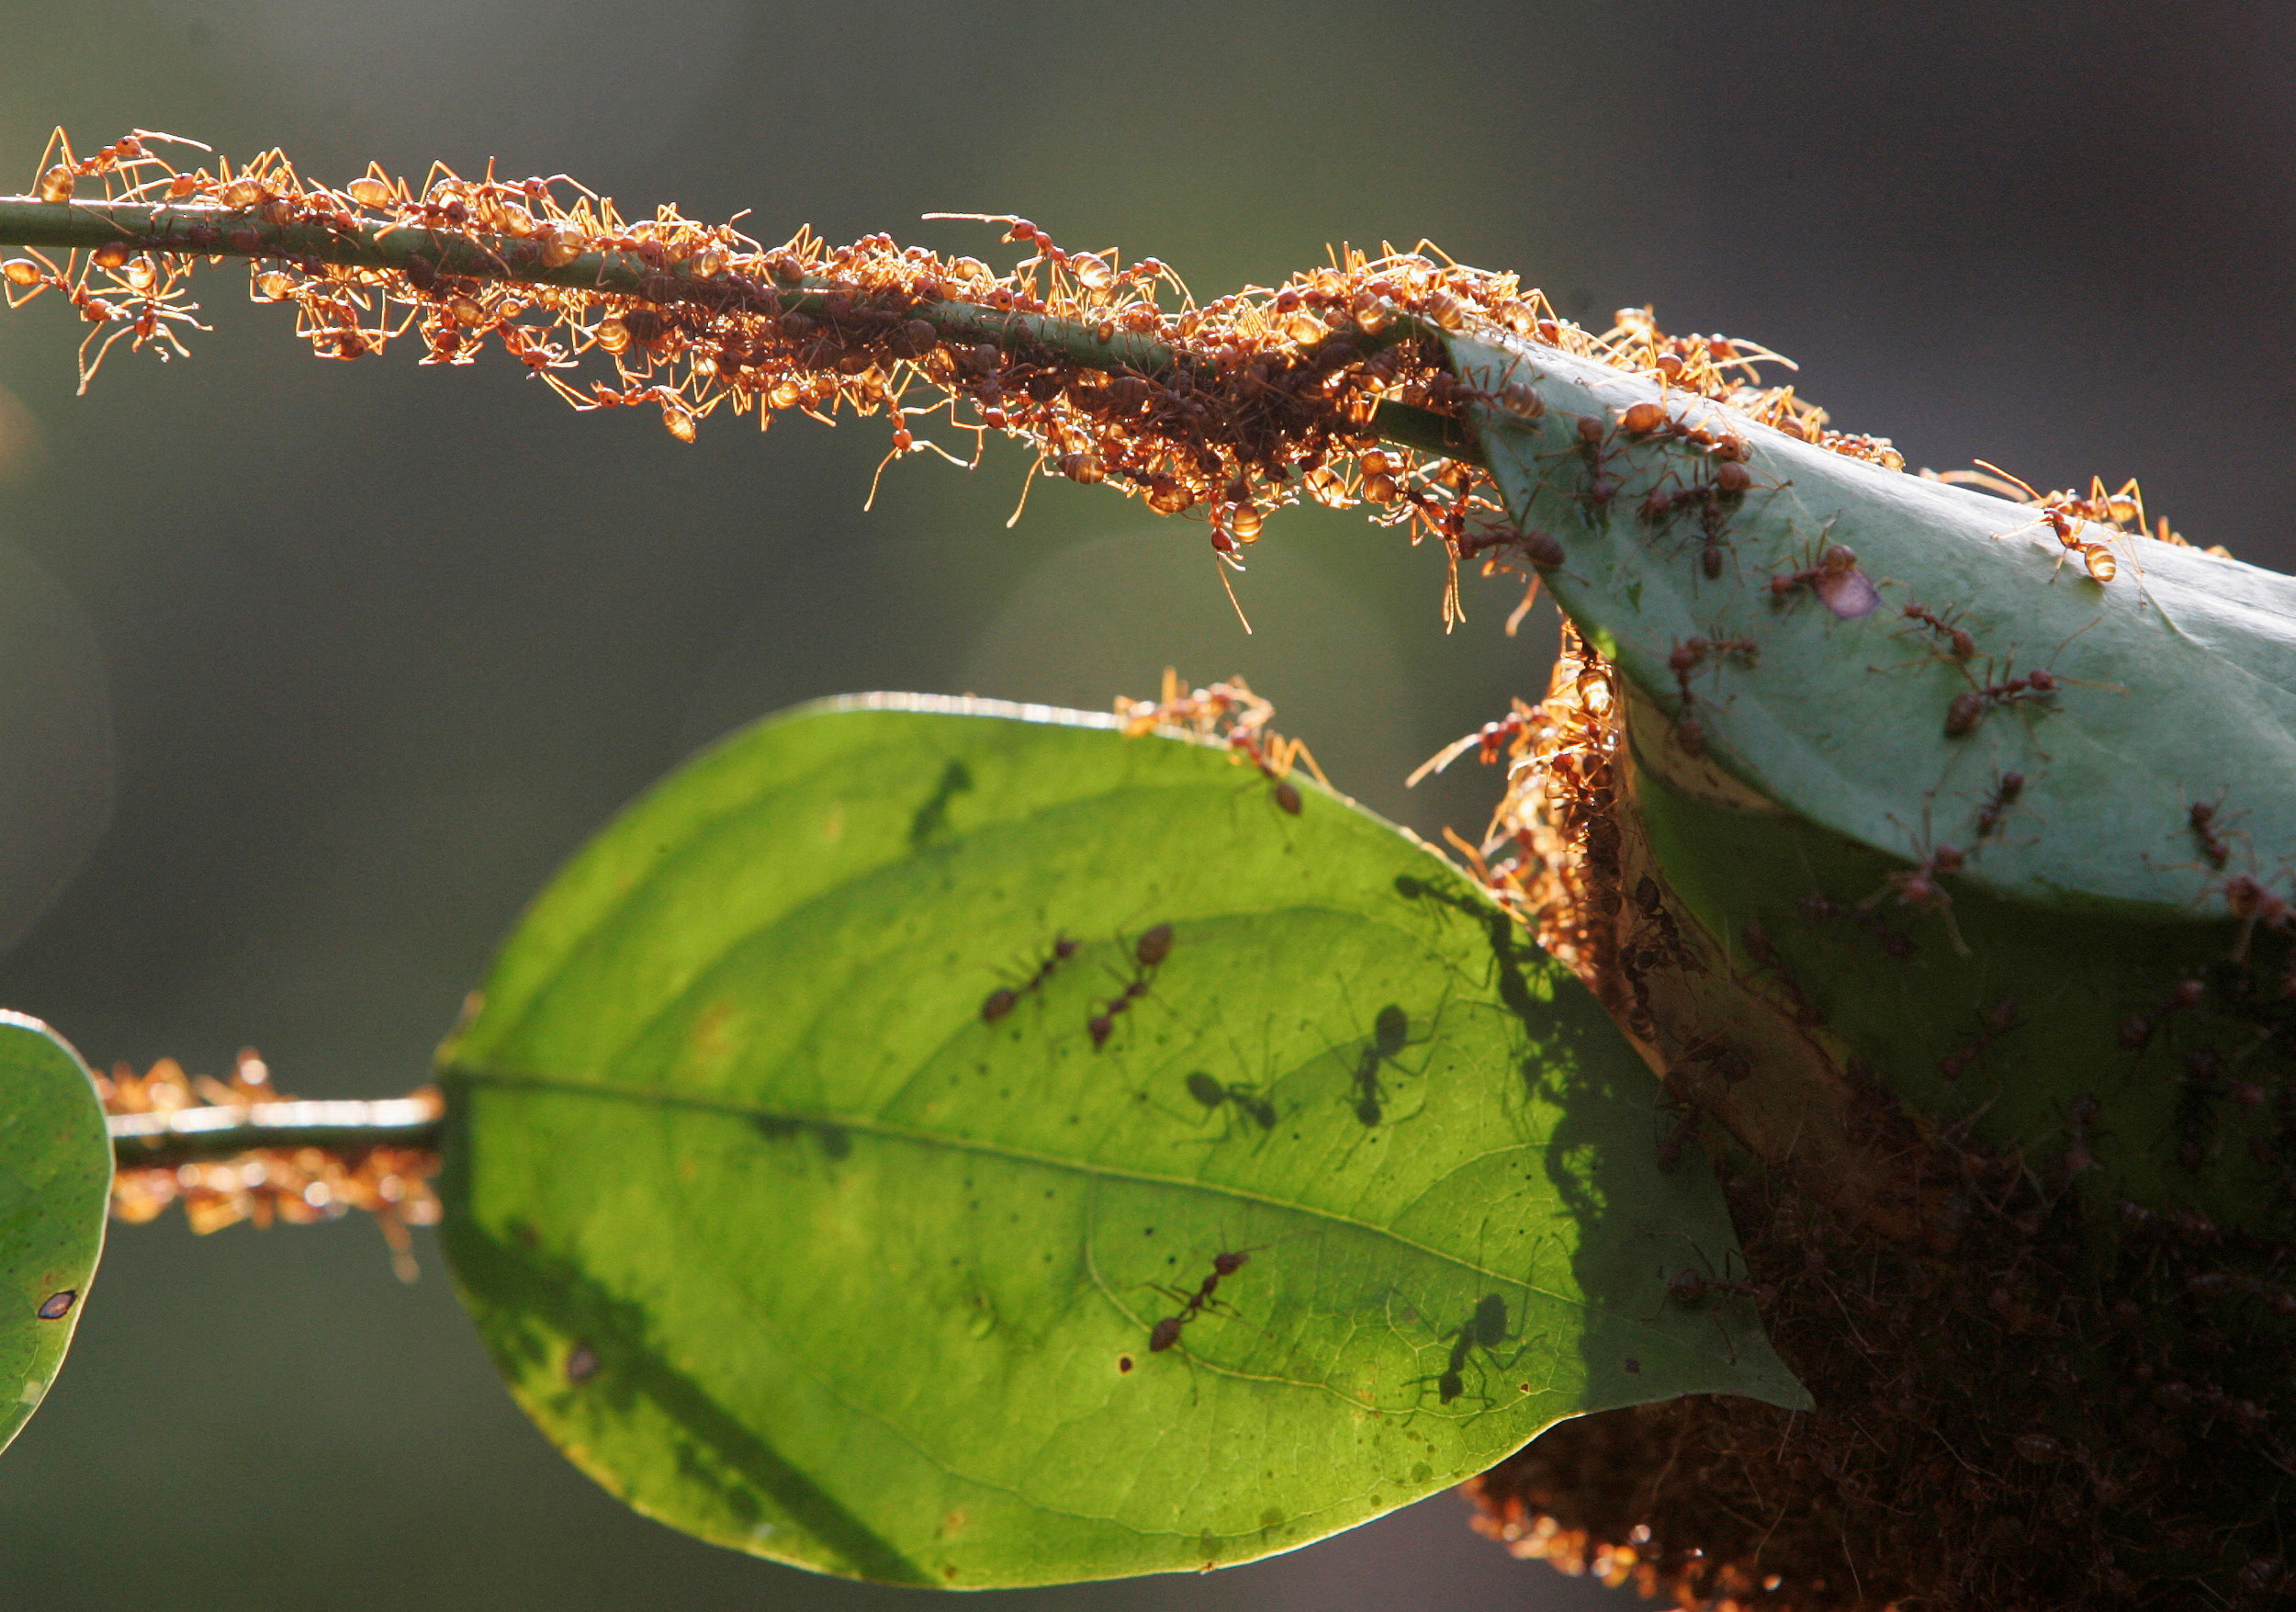 A colony of weaver ants build their nest from leaves in Kuala Lumpur